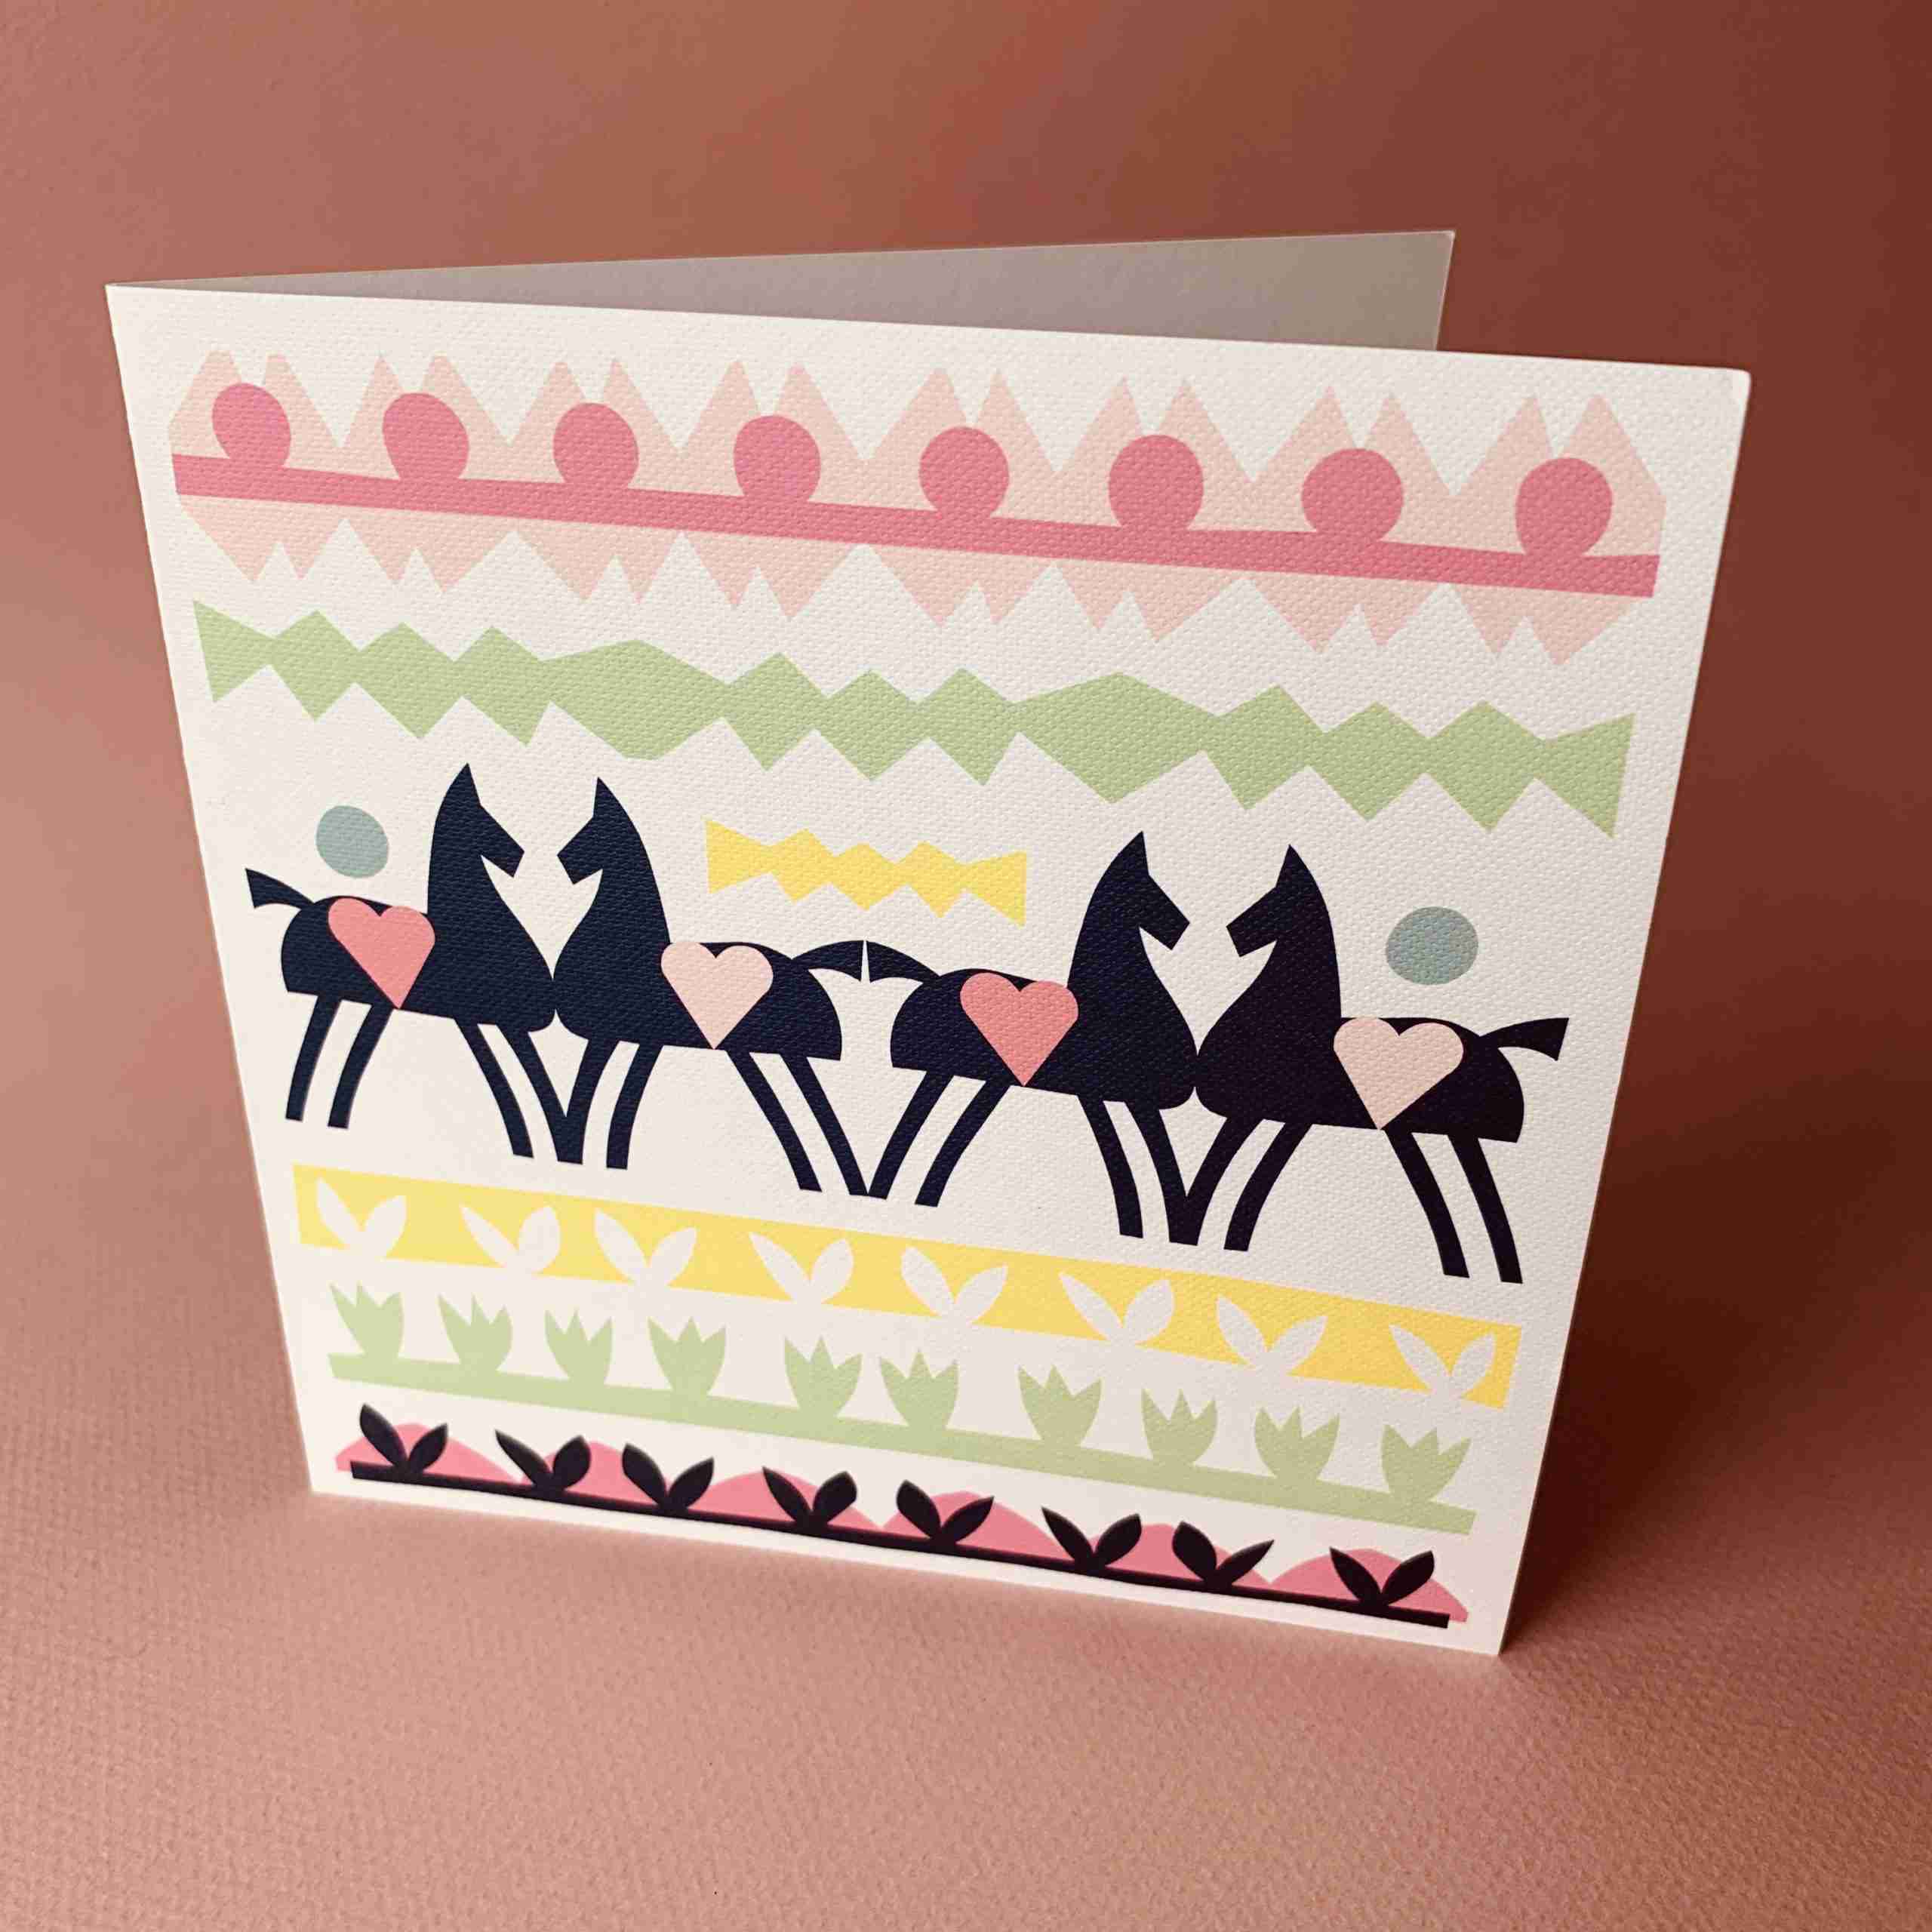 Horses and Hearts Card by Fiona Wilson